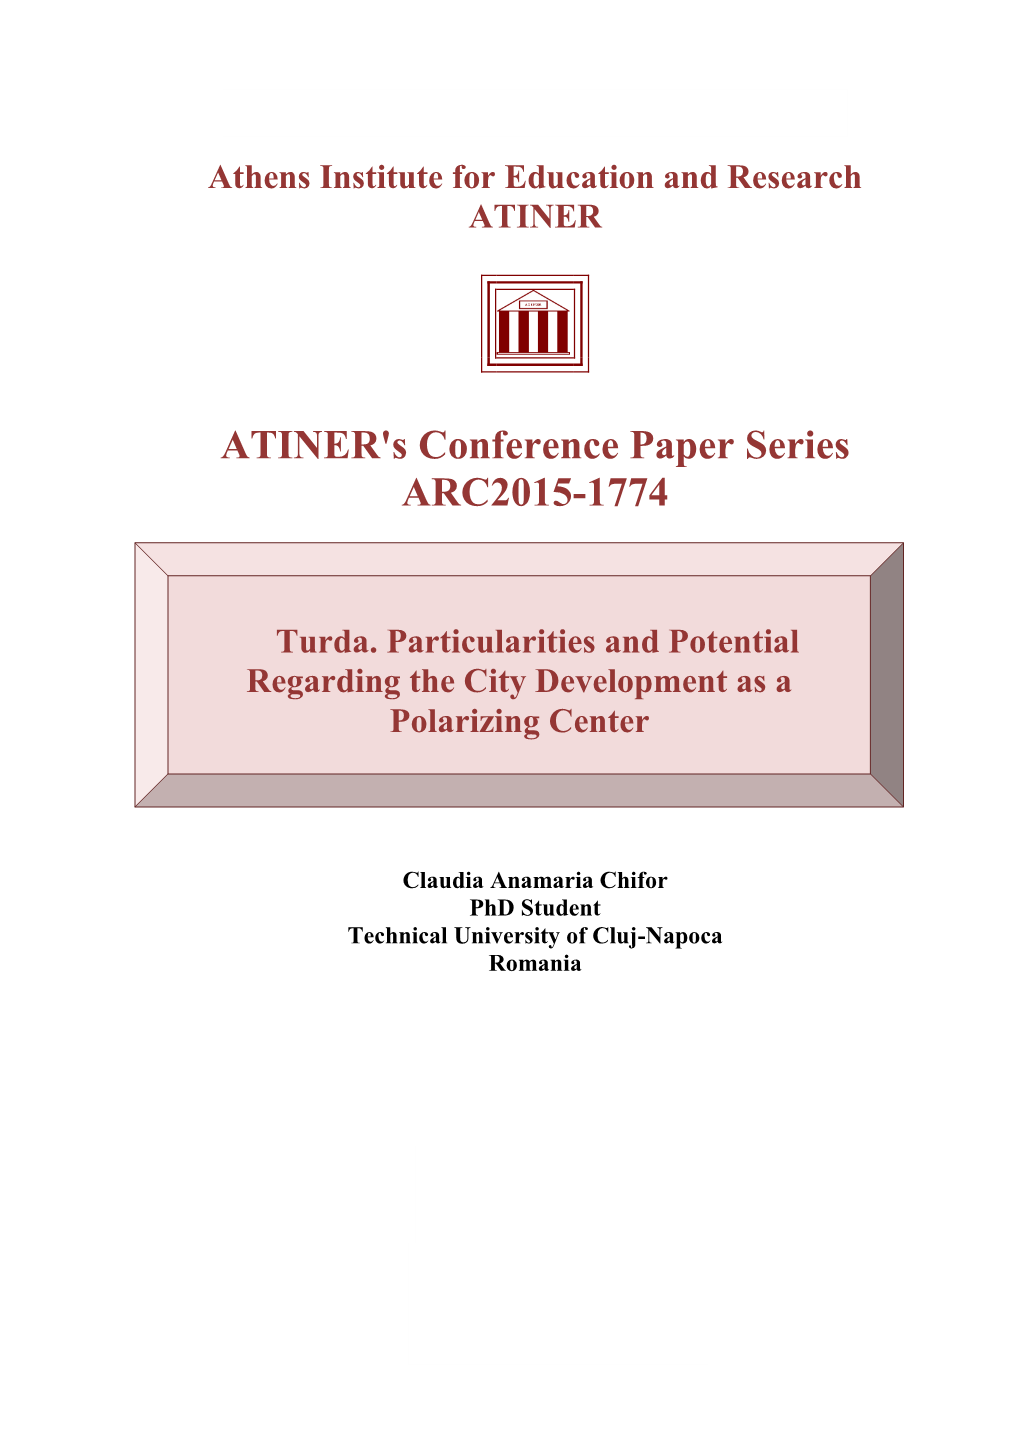 ATINER's Conference Paper Series ARC2015-1774